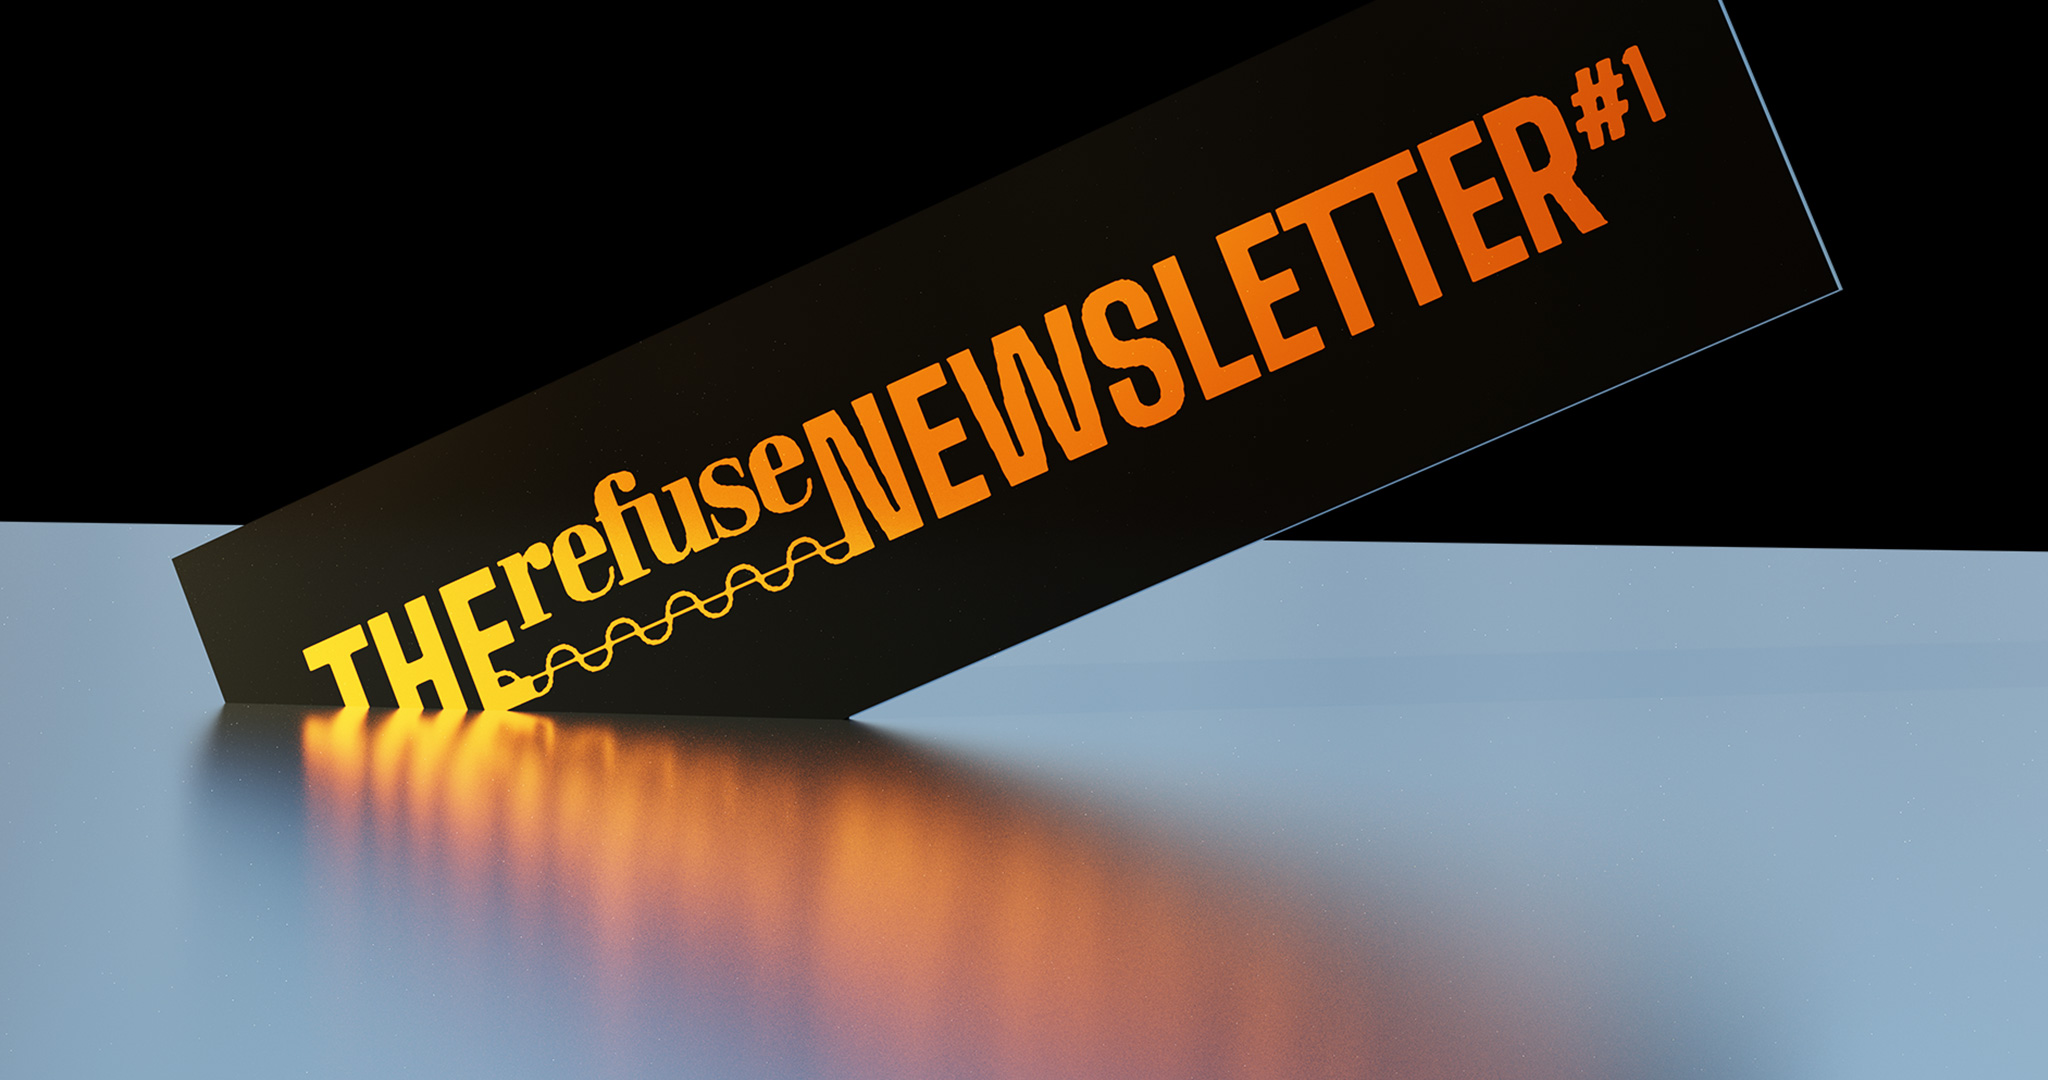 A realistic, 3D render of typography engraved in gold, on a black rectangle. Typography reads: The Refuse Newsletter #1.